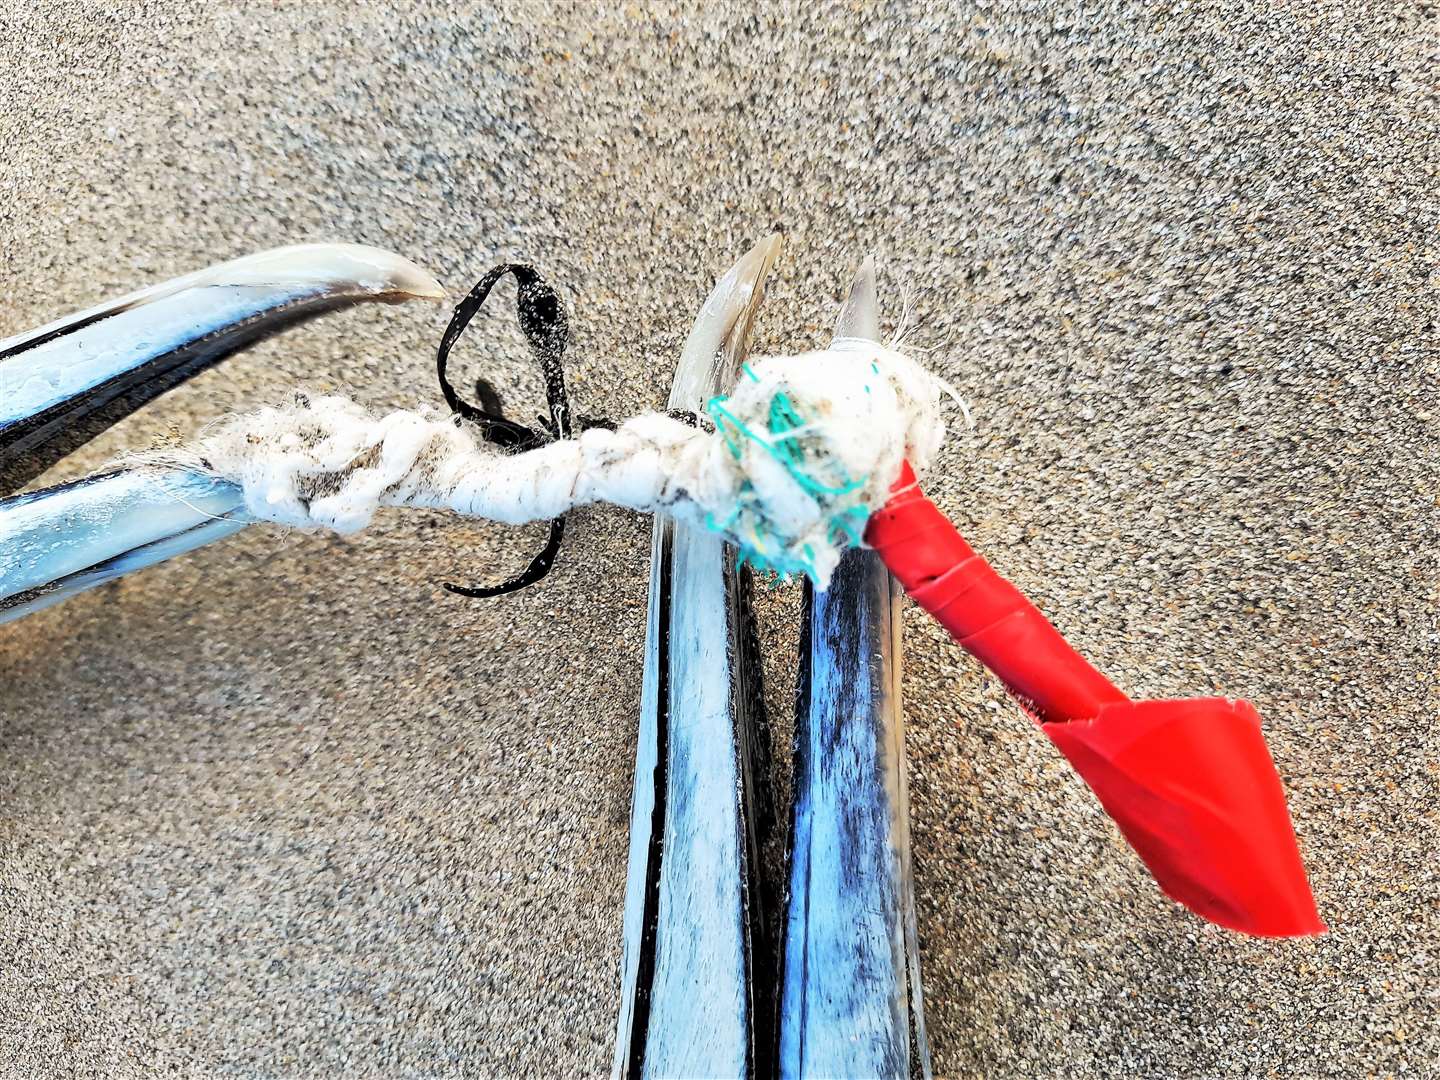 The gannets beaks are firmly tied together with the short piece of plastic string. This sad image highlights the issue of plastic pollution in our seas ahead of World Ocean Day on June 8.